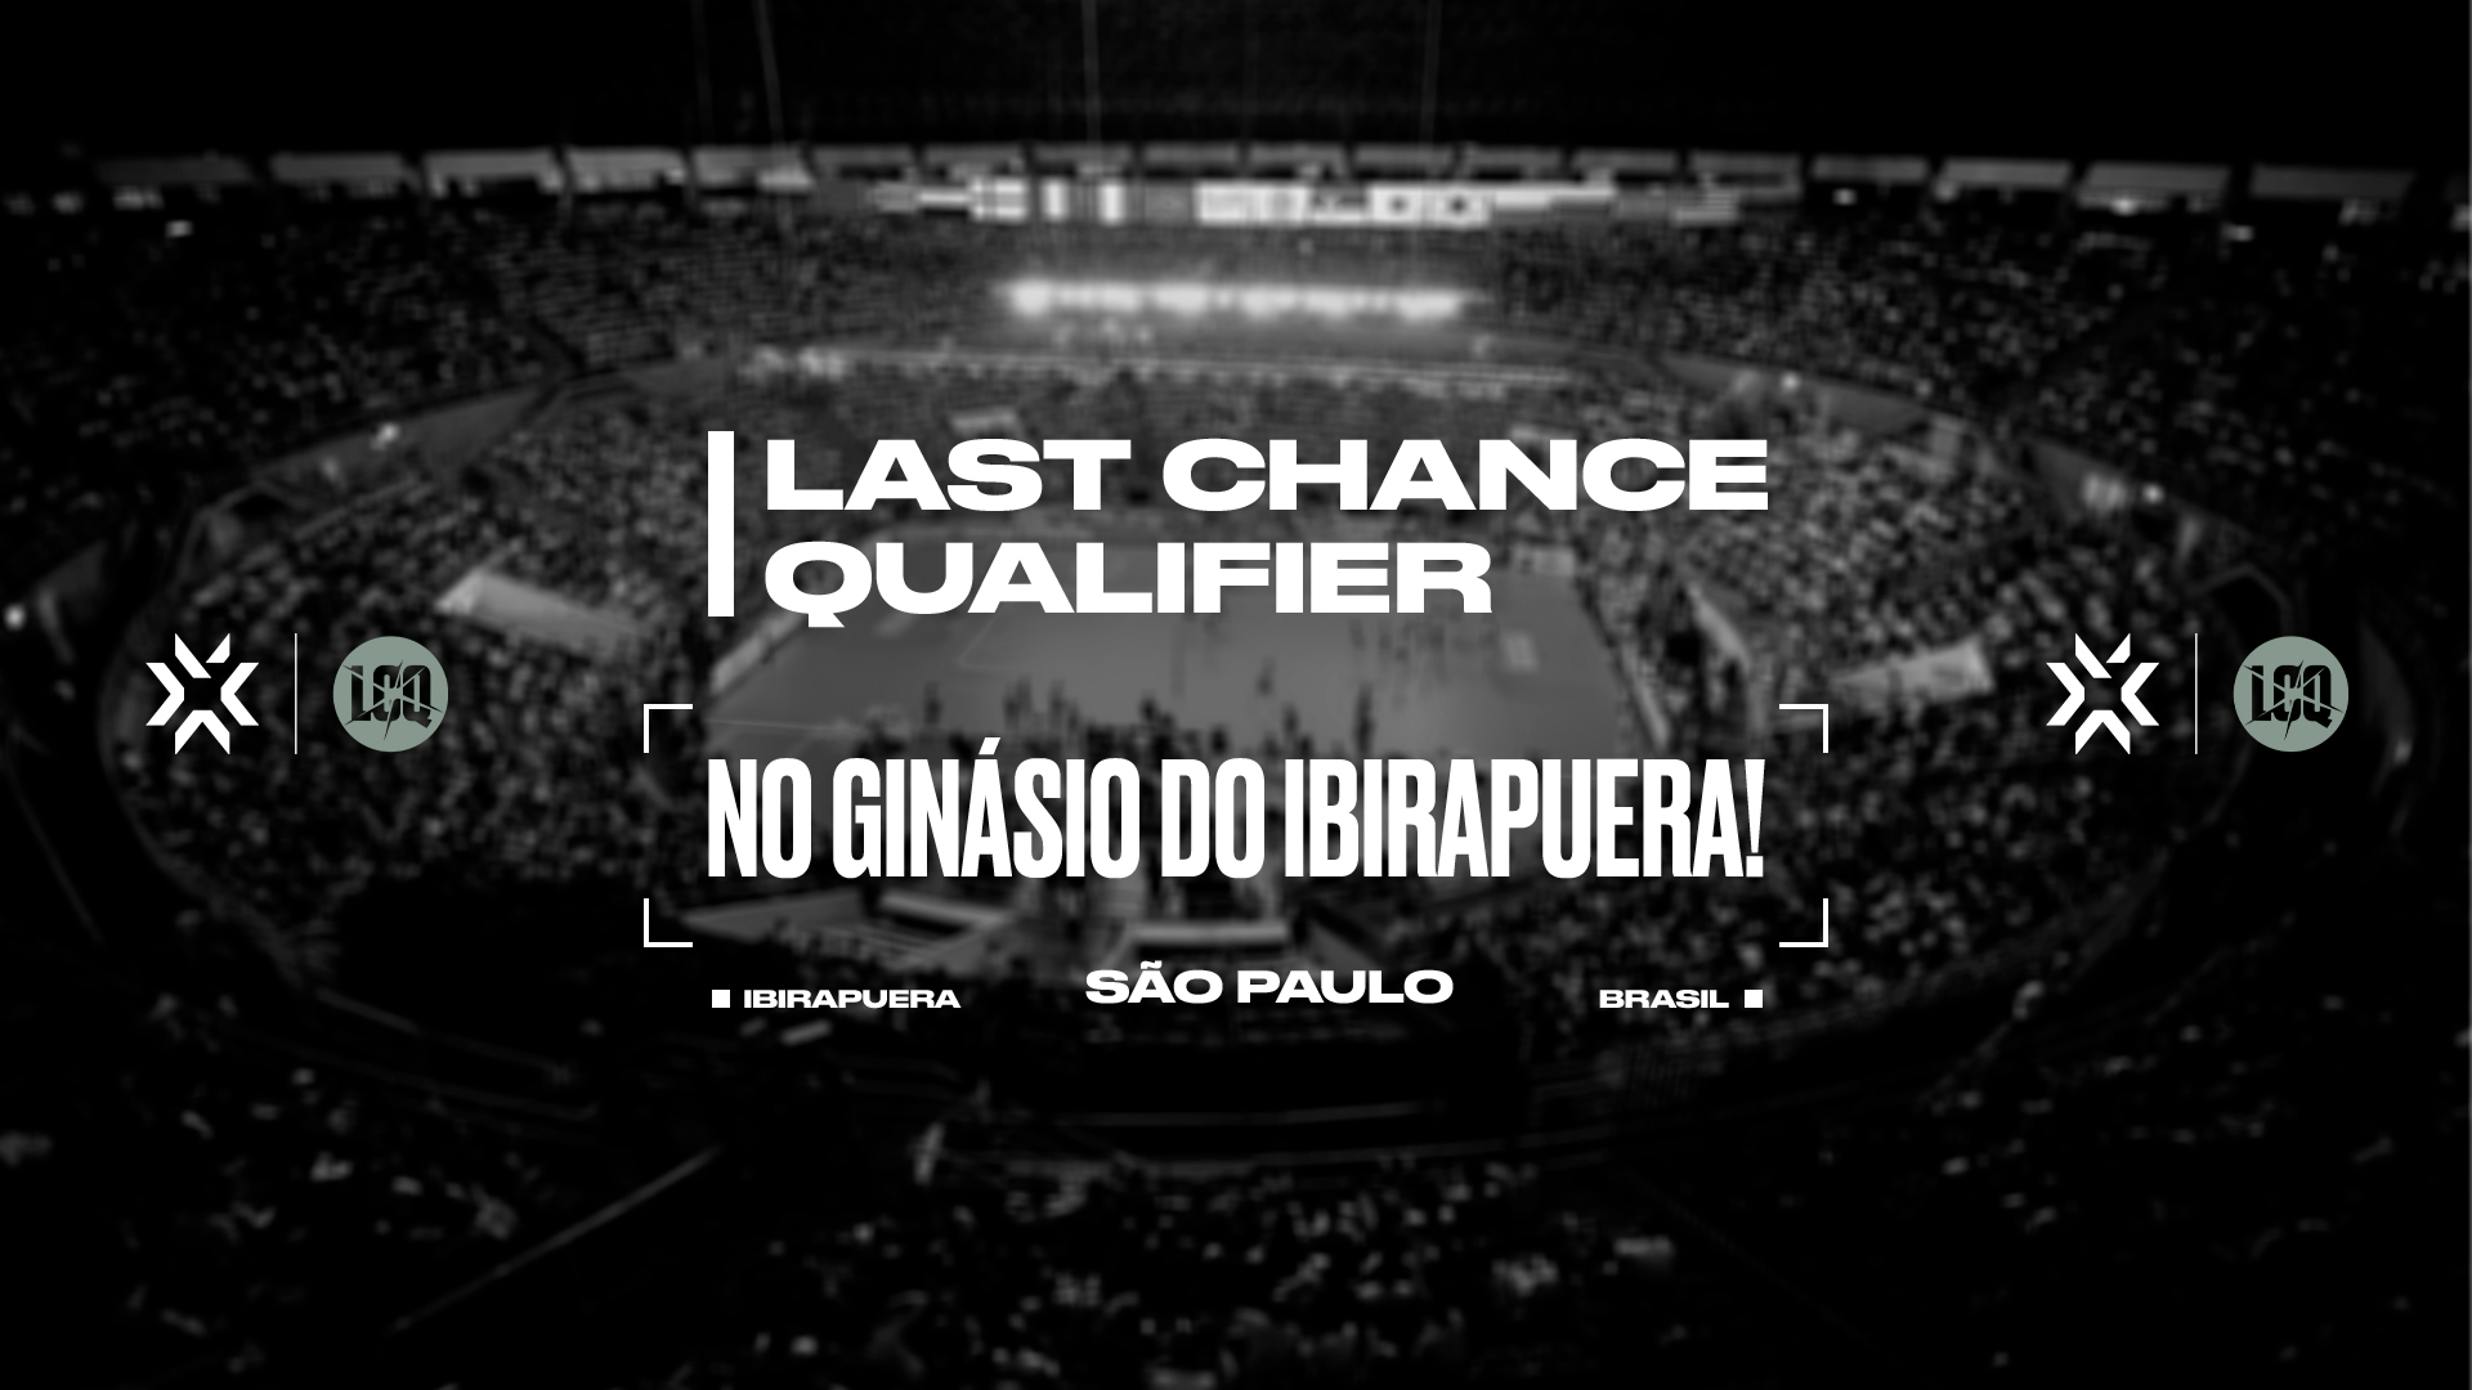 Brazil vs LATAM: Last Chance Qualifier to be held in-person at Ginásio do Ibirapuera